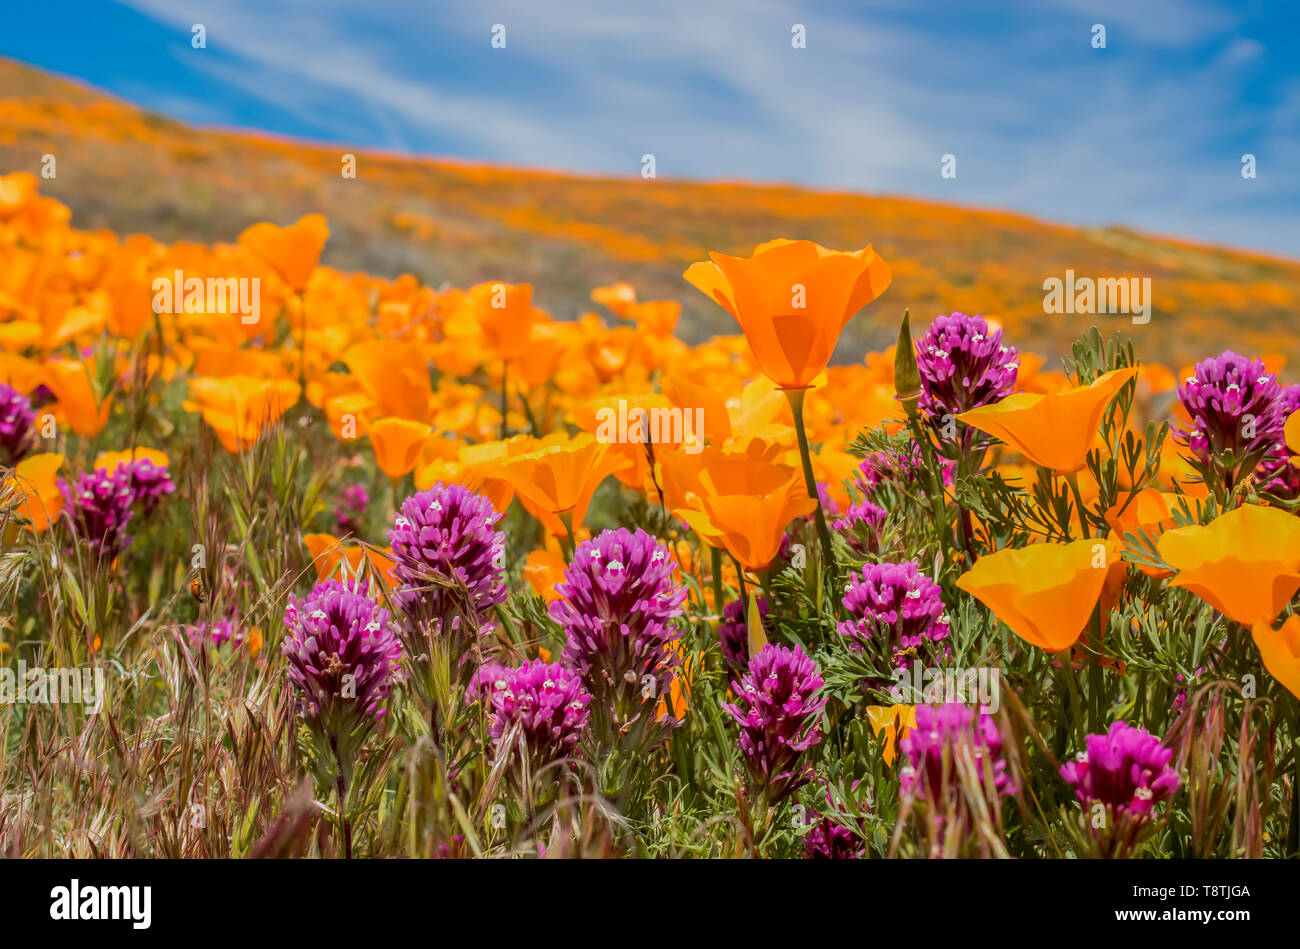 Close up field of bright orange poppies and purple owls clover wildflowers under blue sky. Stock Photo